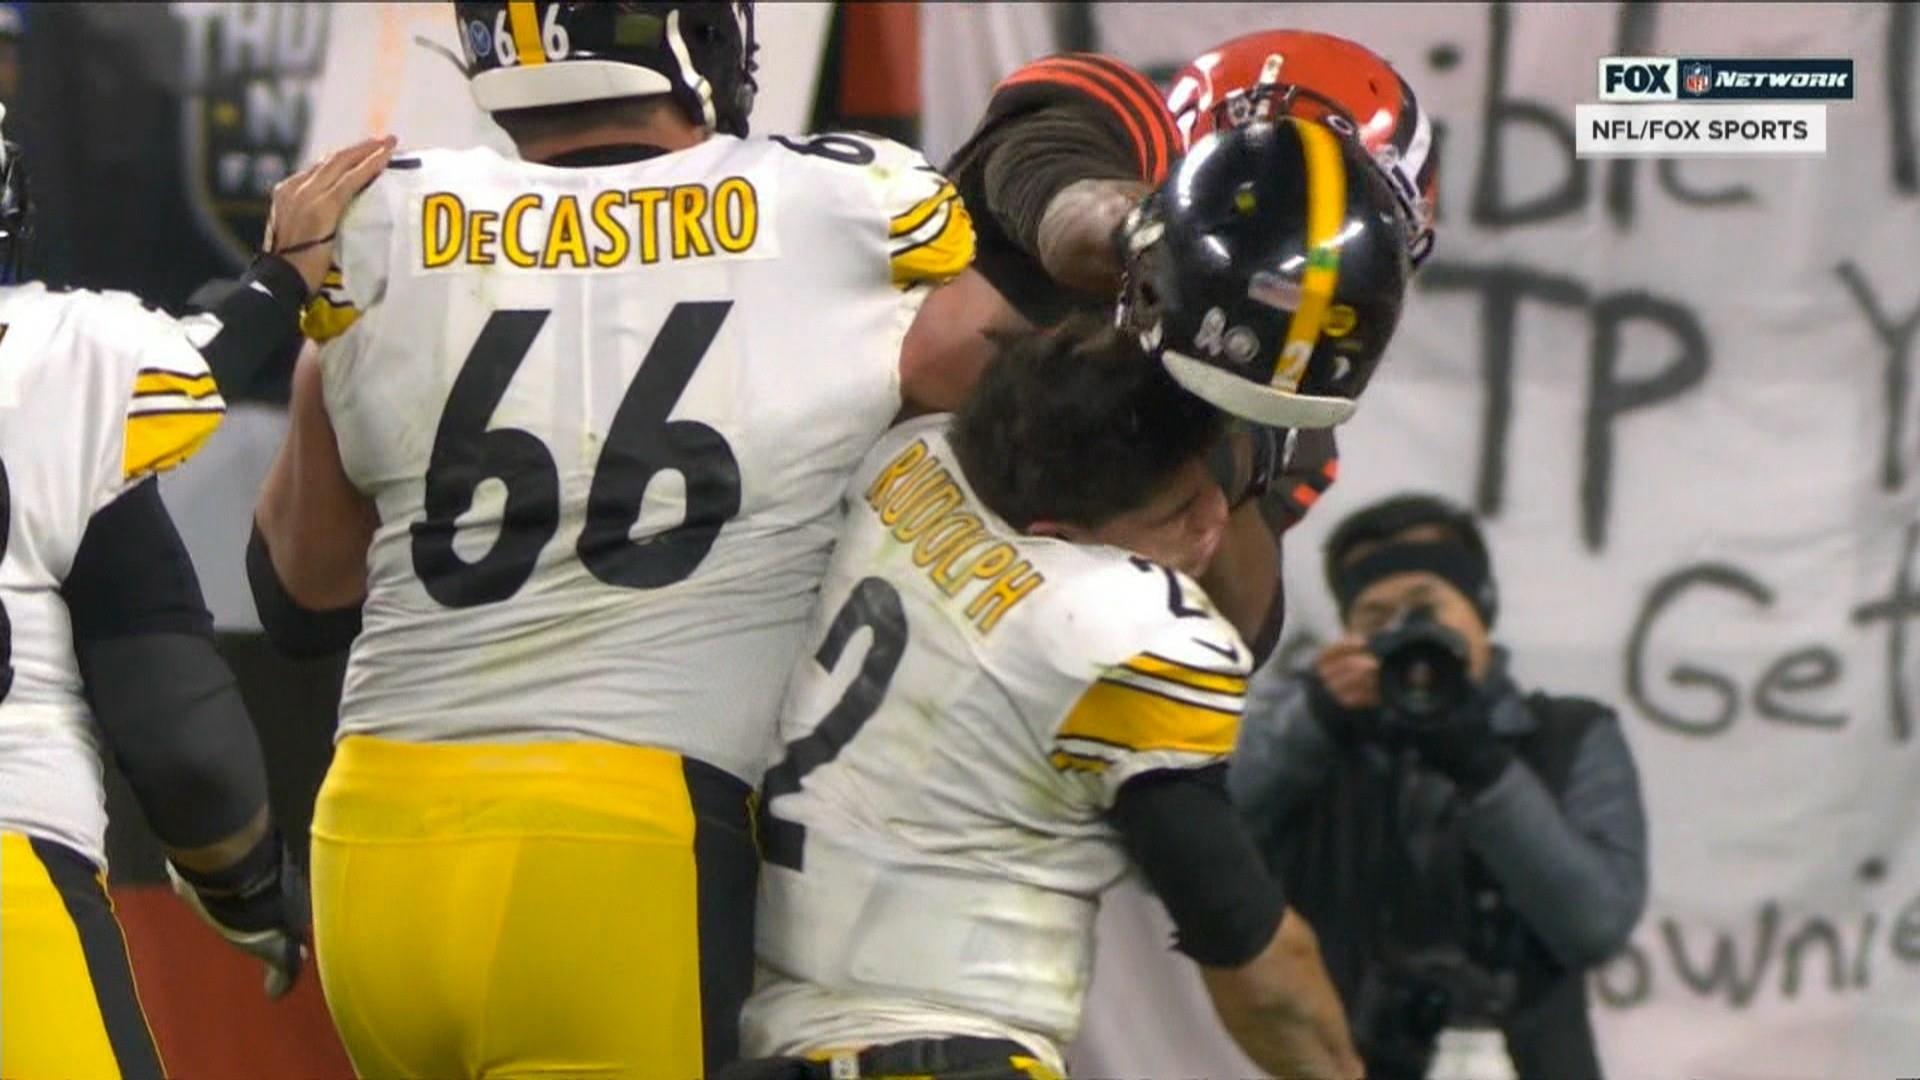 Ugly brawl breaks out during Steelers-Browns football game